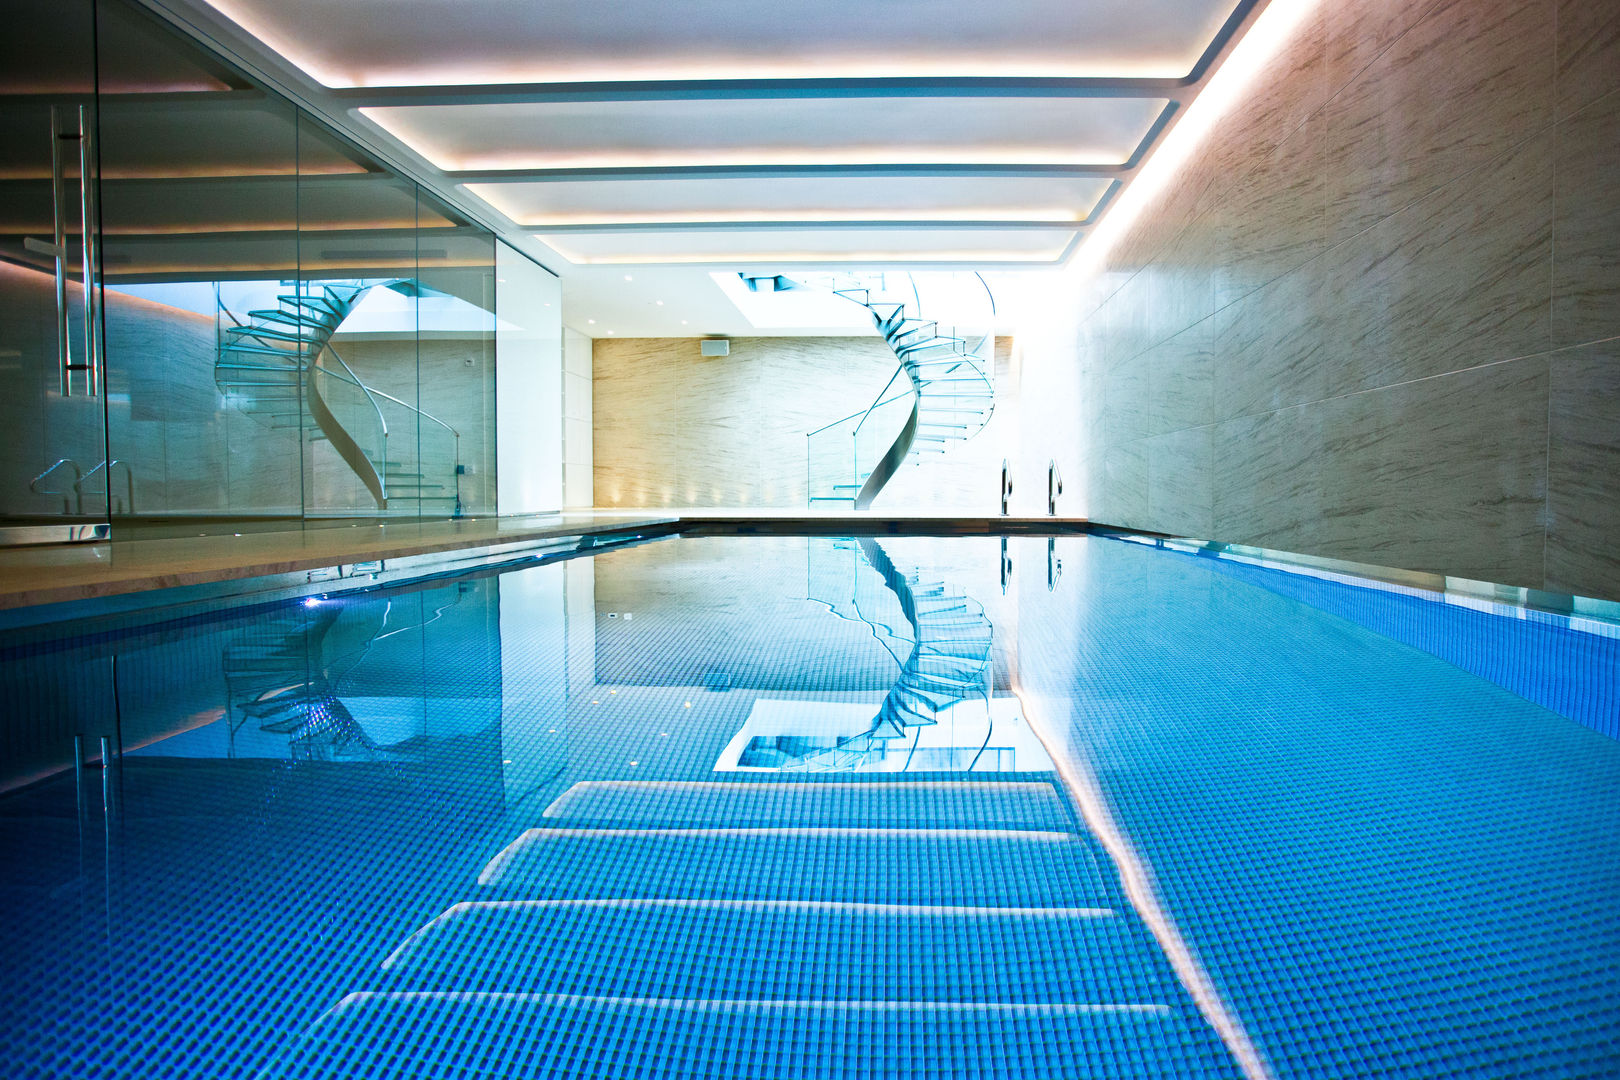 Pool & Wellness Area with Spiral Staircase, London Swimming Pool Company London Swimming Pool Company Piscinas